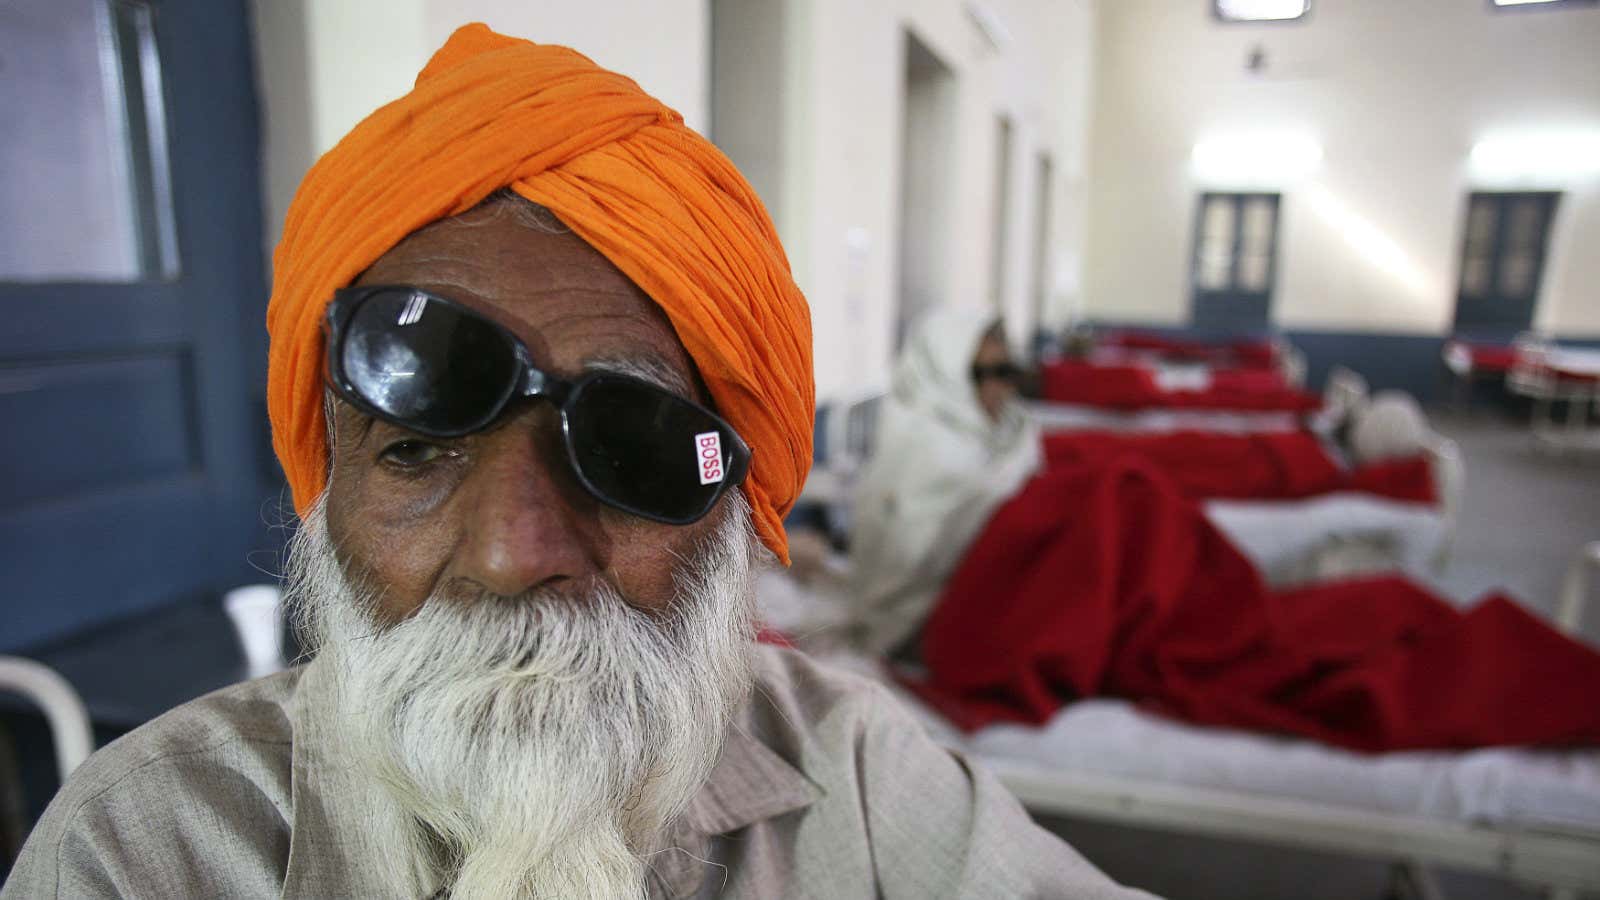 India is home to a third of the world’s blind population.